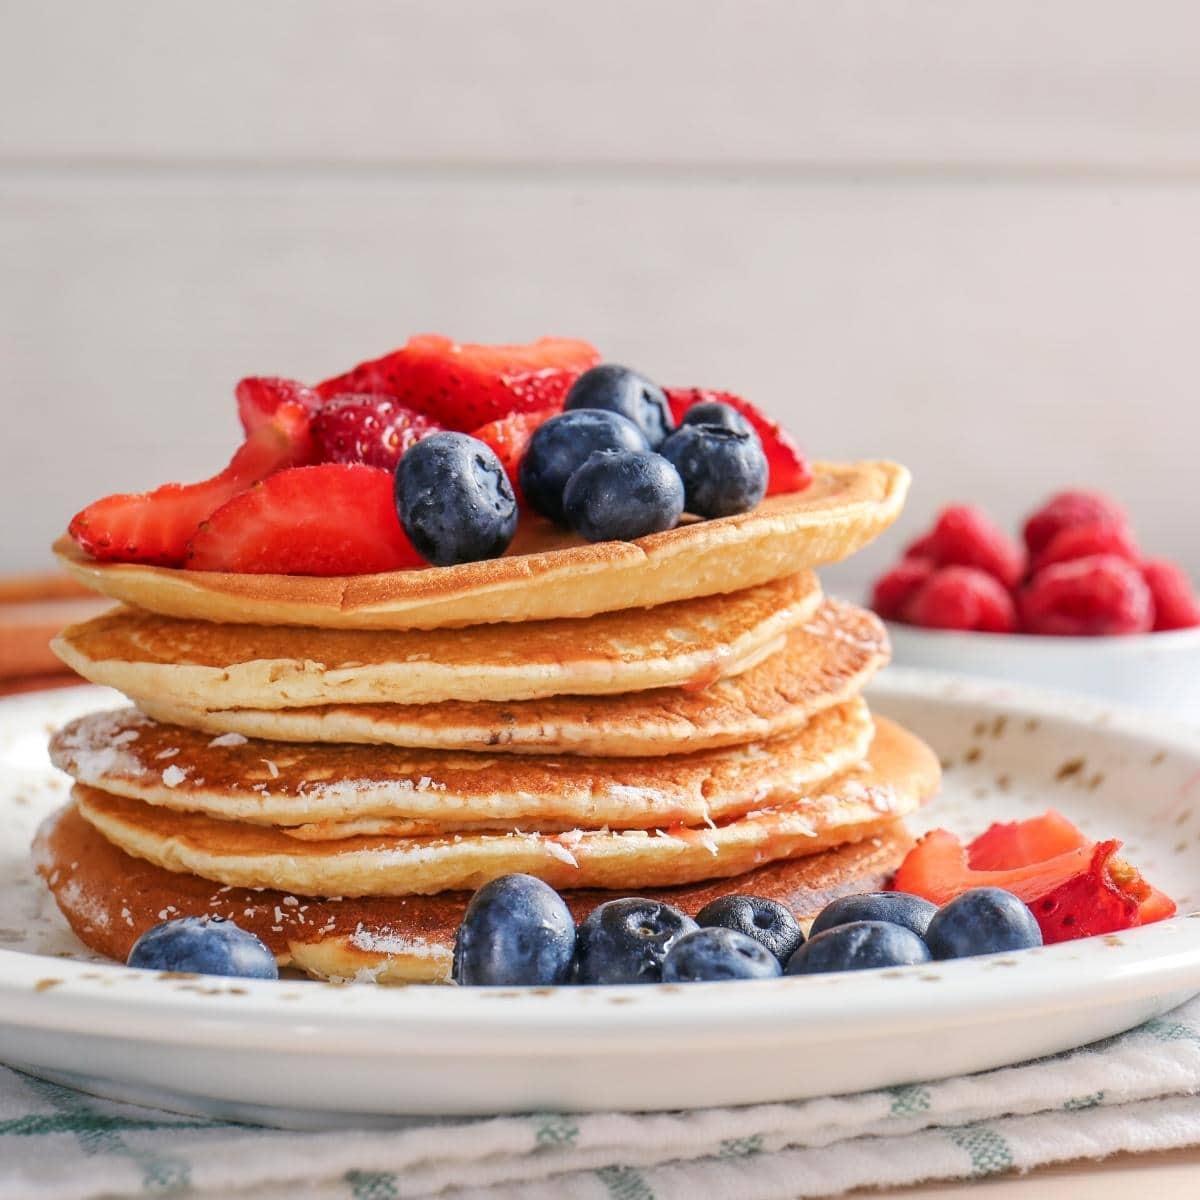 A stack of pancakes topped with fresh berries and shredded coconut.